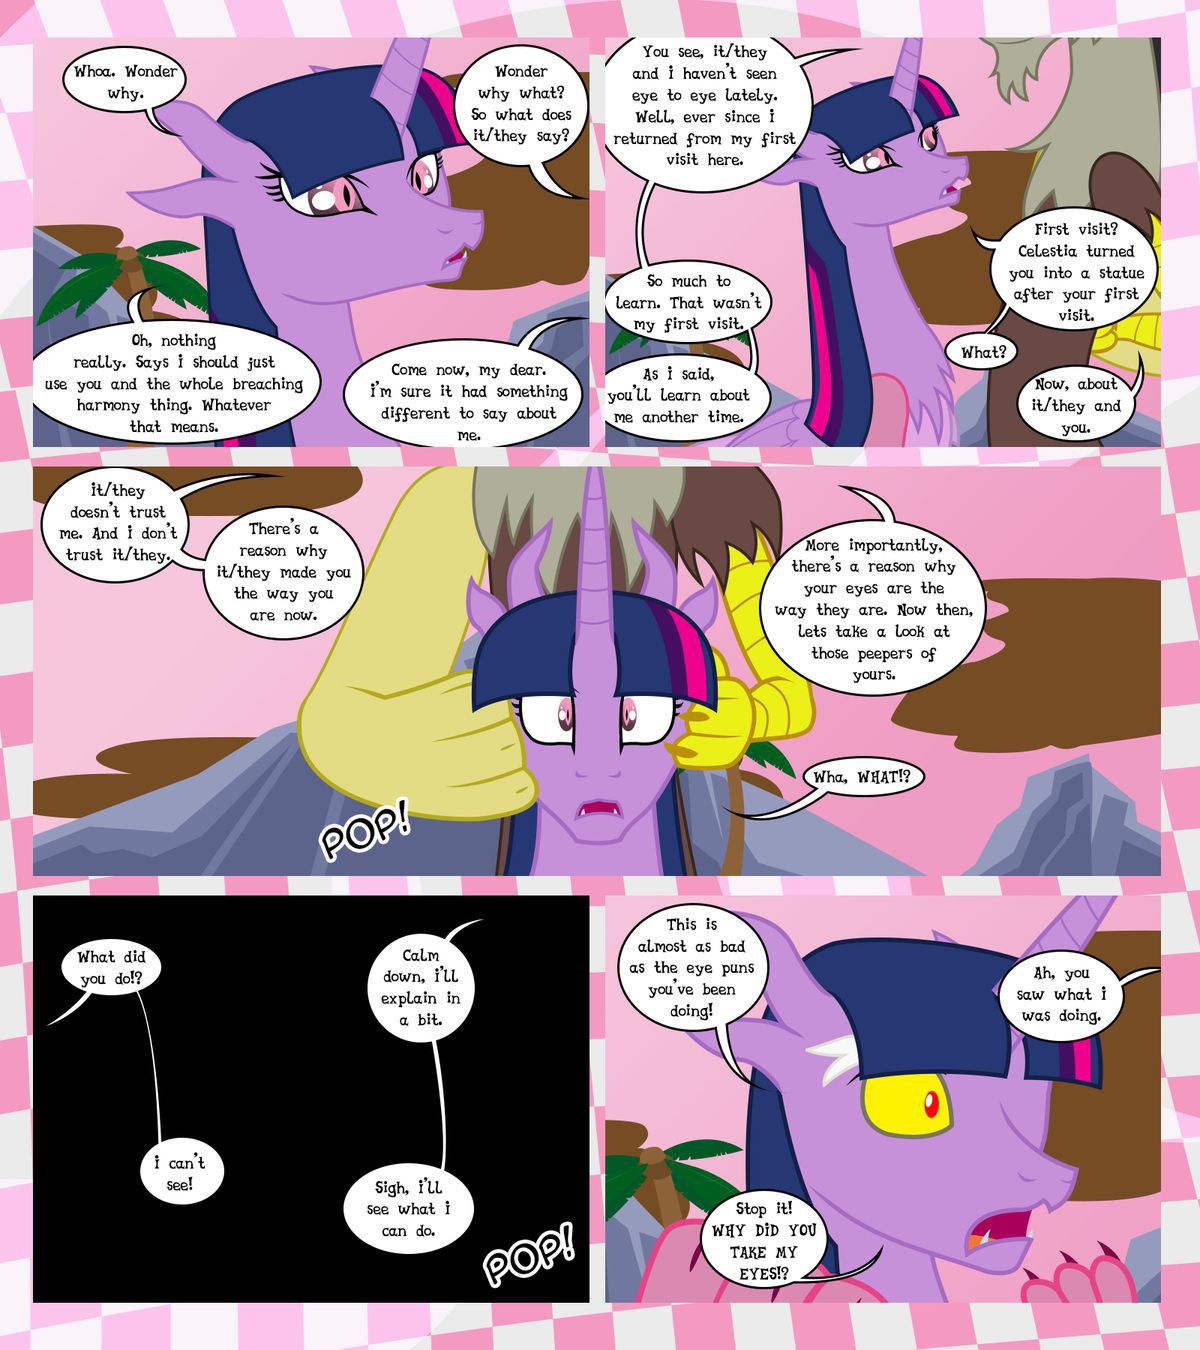 [GatesMcCloud] Cutie Mark Crusaders 10k: Chapter 3 - The Lost (My Little Pony: Friendship is Magic) [English] [Ongoing] 23